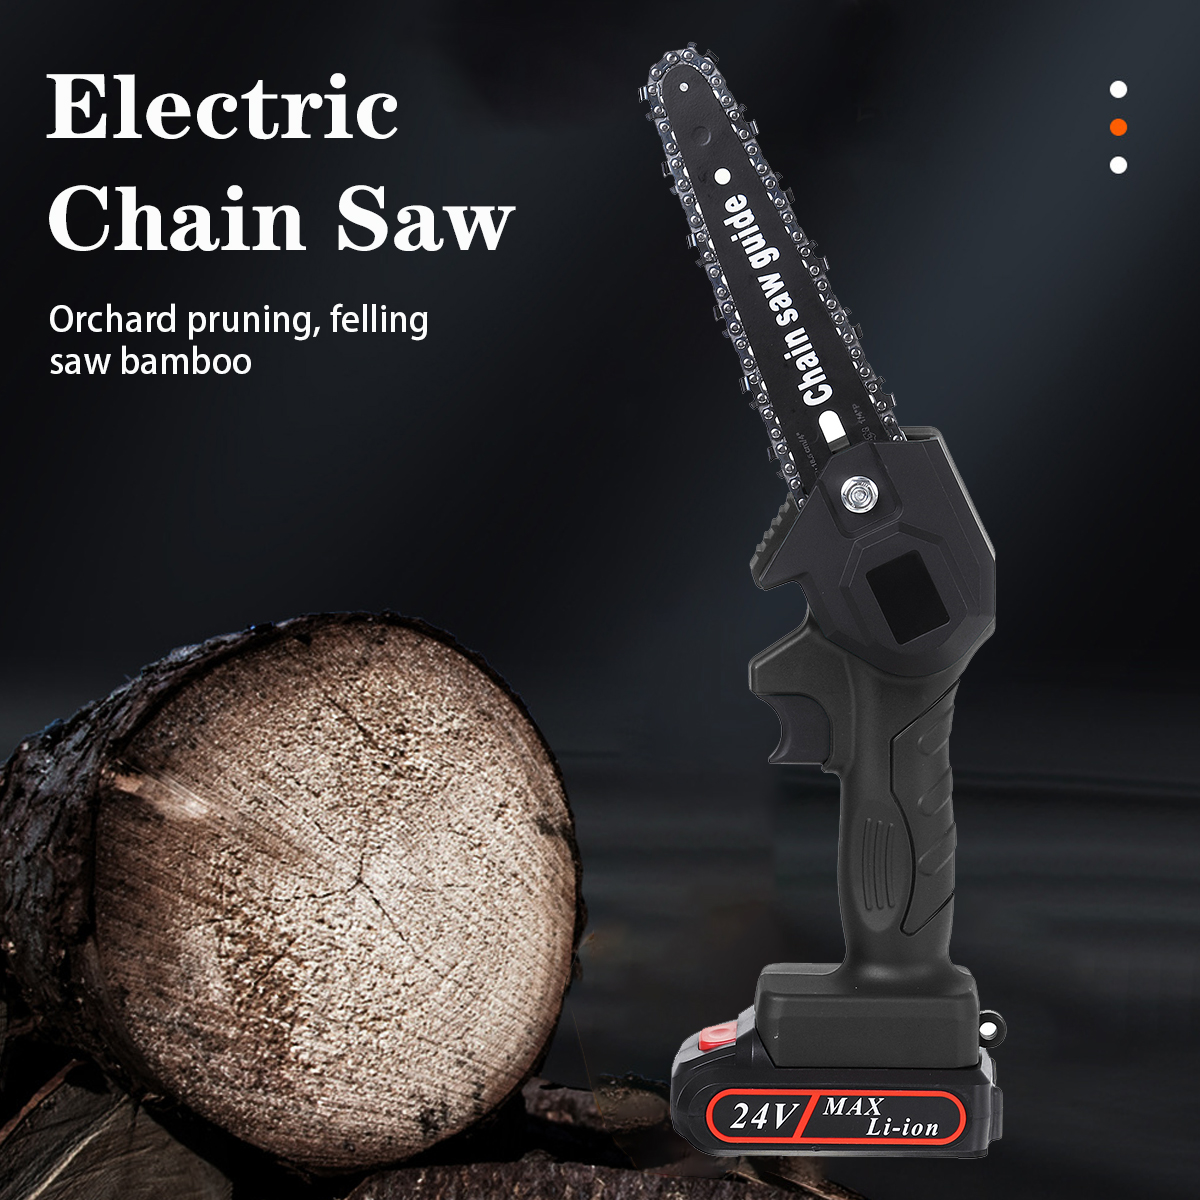 DC-24V-6-Inch-Cordless-Electric-Chain-Saw-Wood-Mini-Cutter-550W-One-Hand-Saw-with-2Pcs-Batteries-Woo-1817668-2